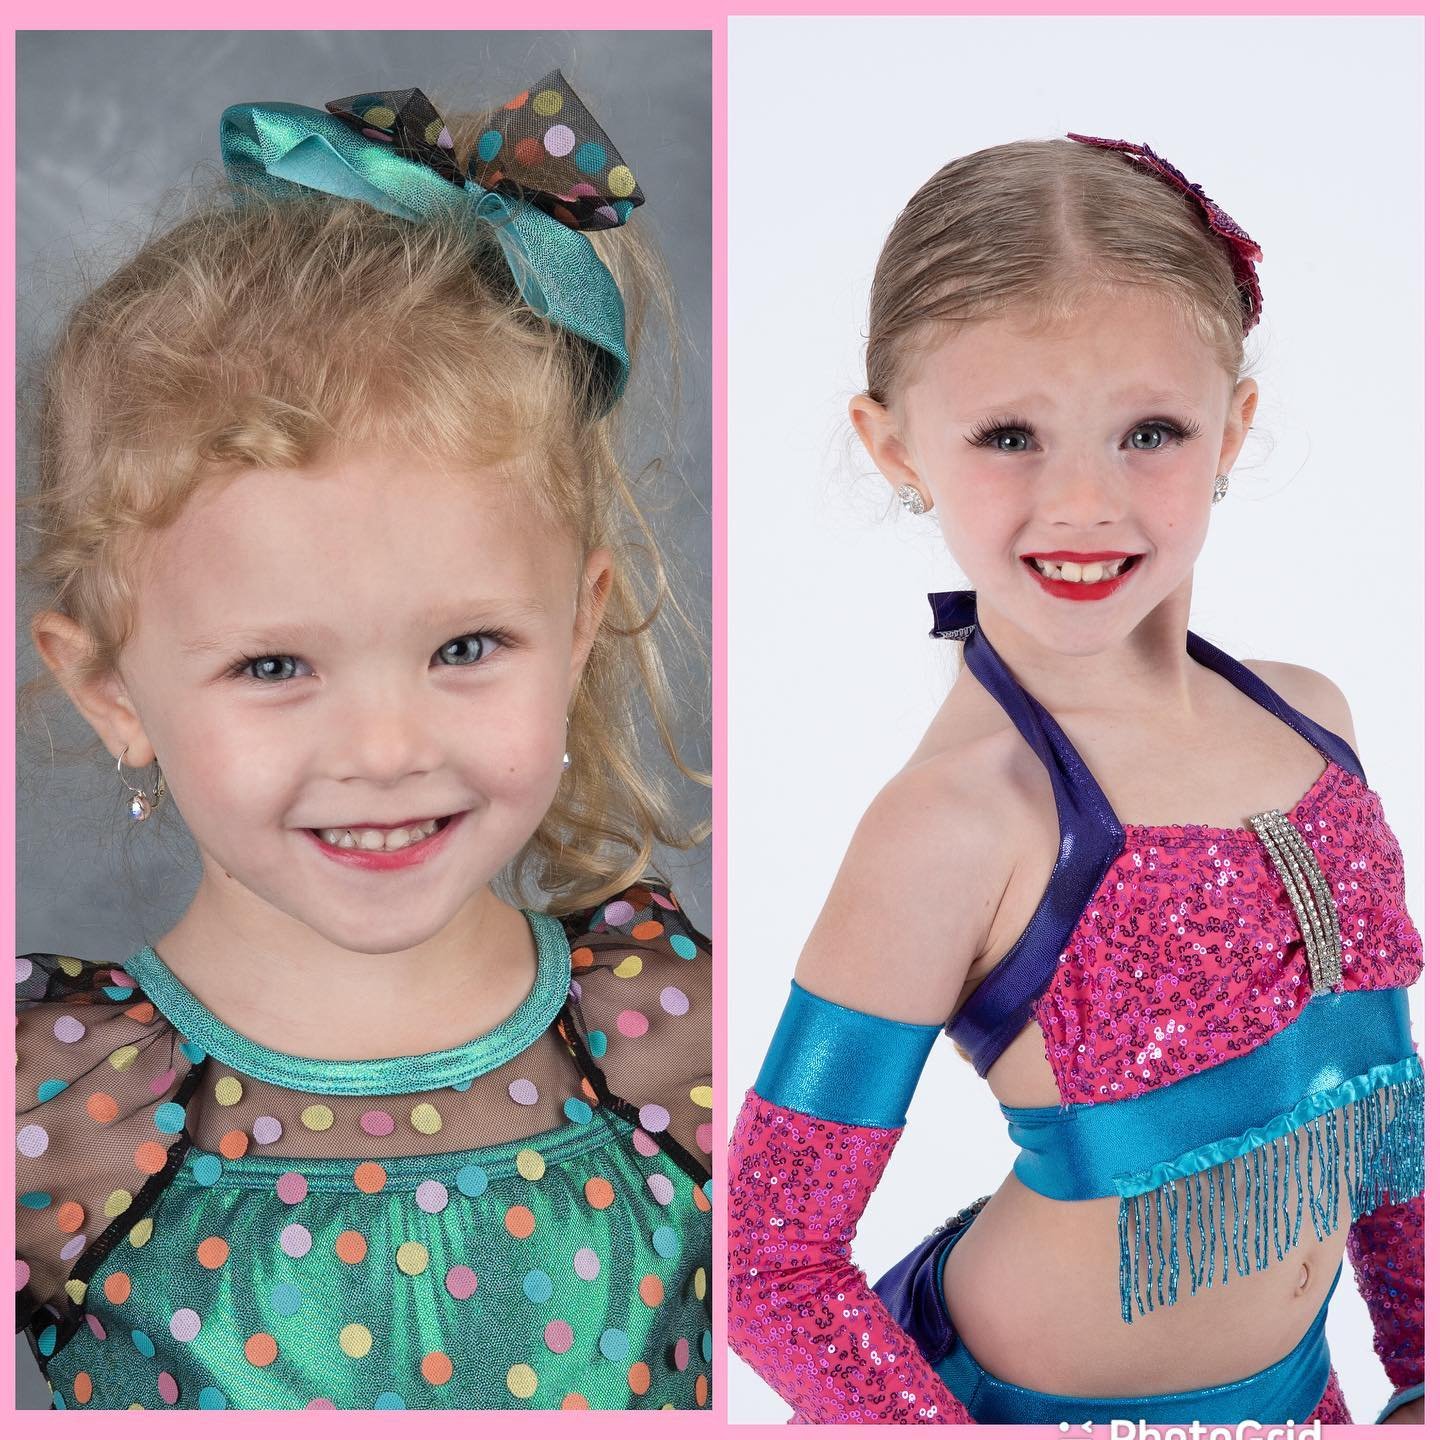 On the left is 2020 Hailey from her class with Miss Kiersten
On the right is 2024 Hailey from her solo with Miss Nanette
How does time fly by so fast?!?!
@dream_makers_performing_arts @nanettemichele8  @kierstendances_ 
#growingup #tinydancer #4years